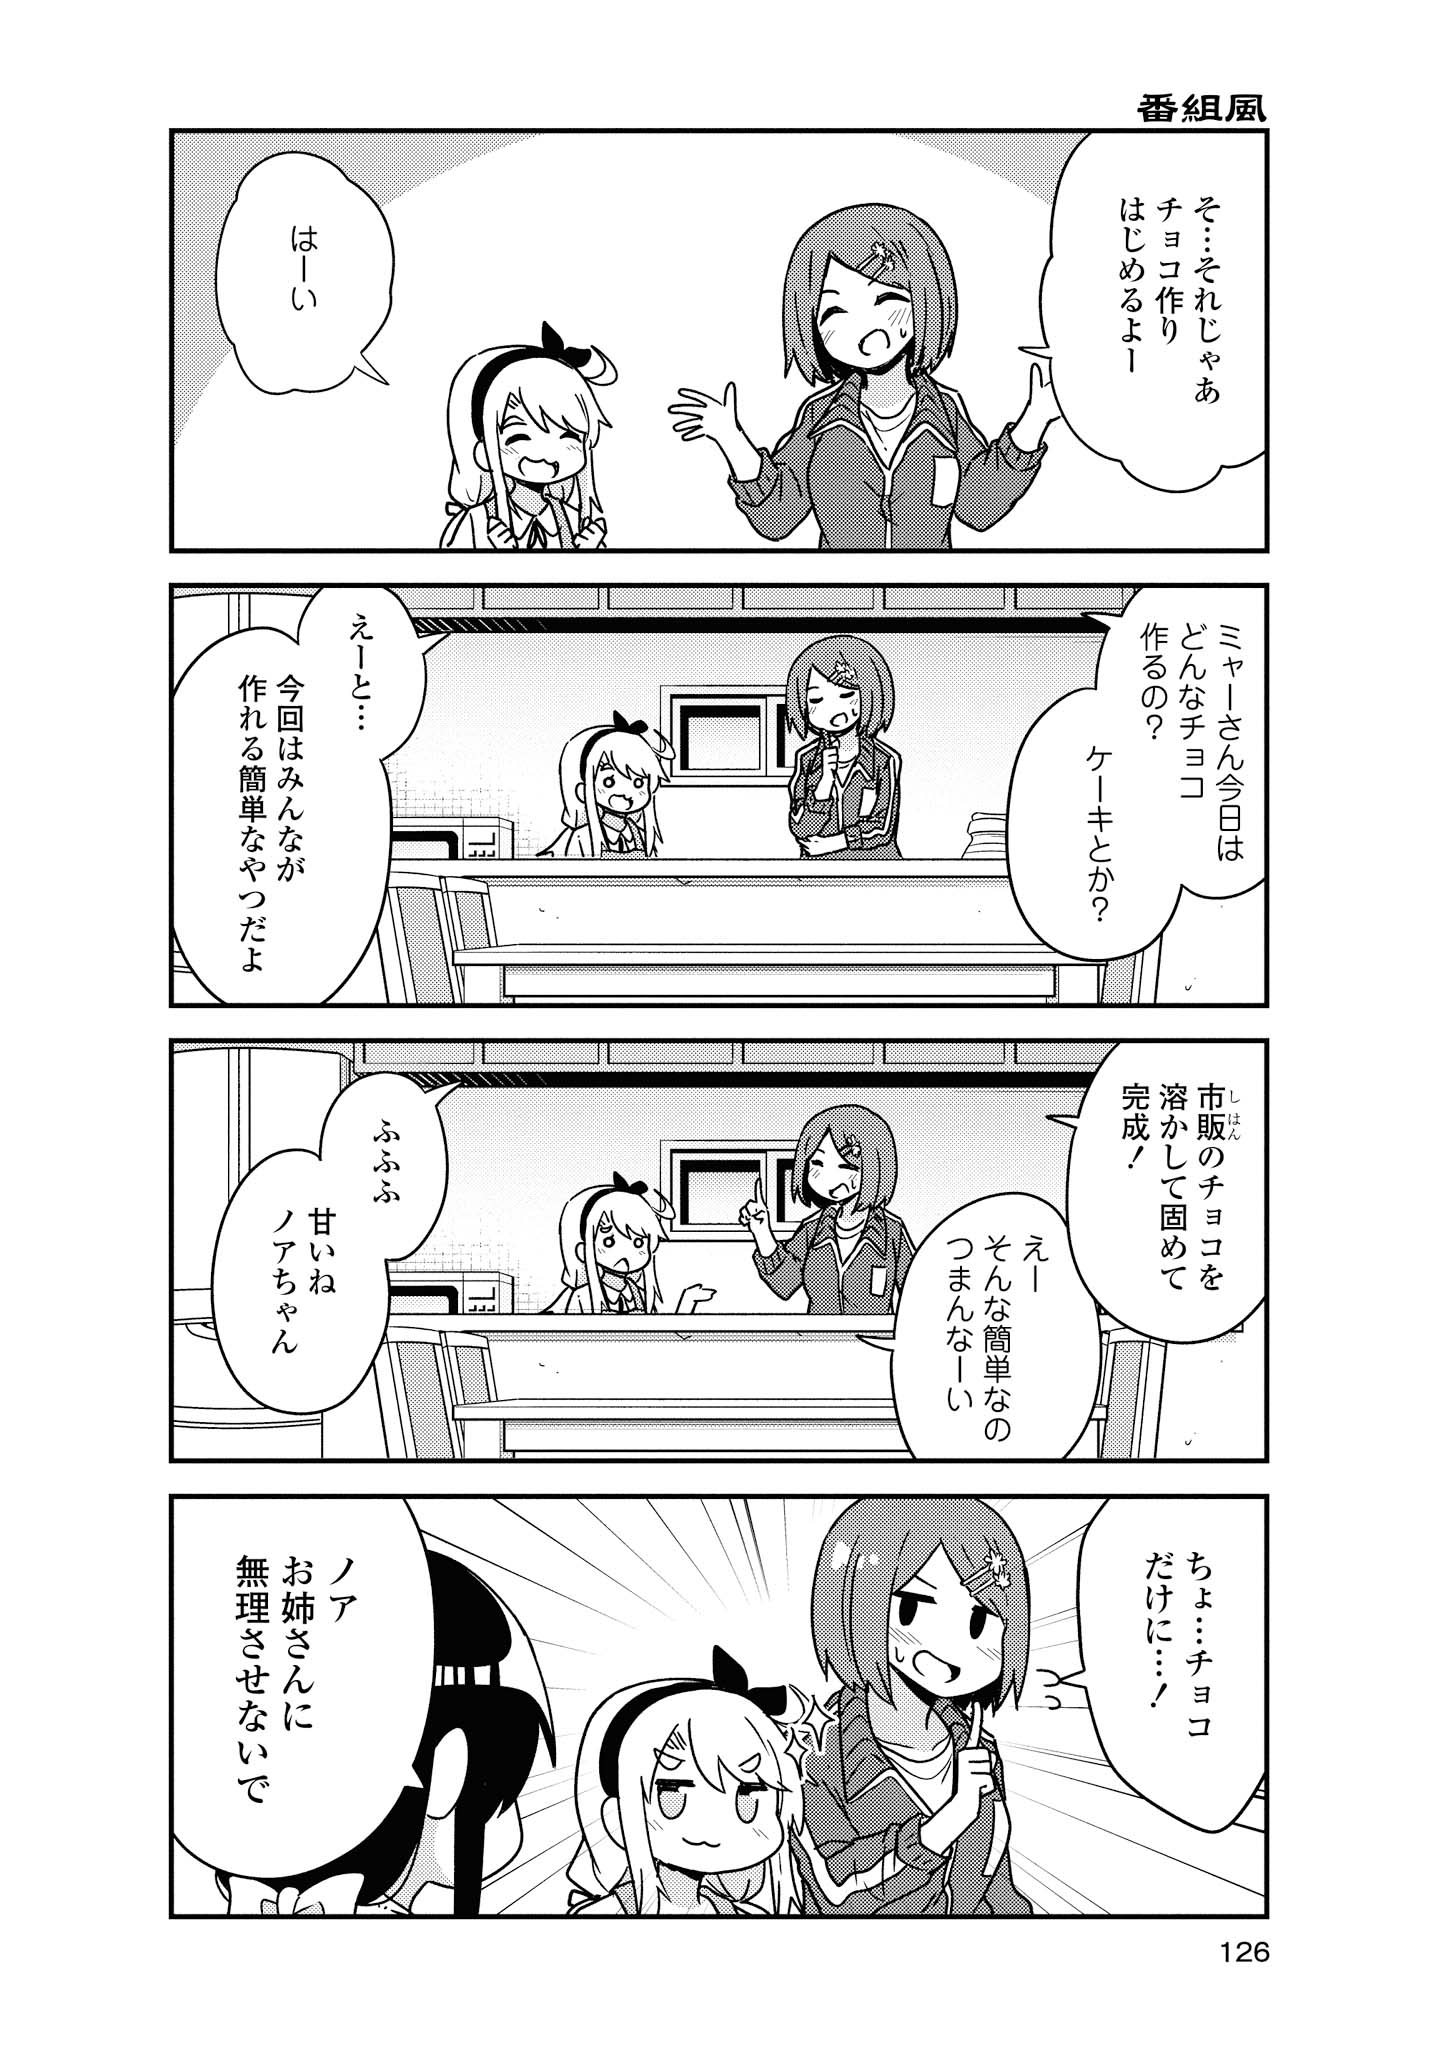 Wataten! An Angel Flew Down to Me 私に天使が舞い降りた！ 第51話 - Page 2